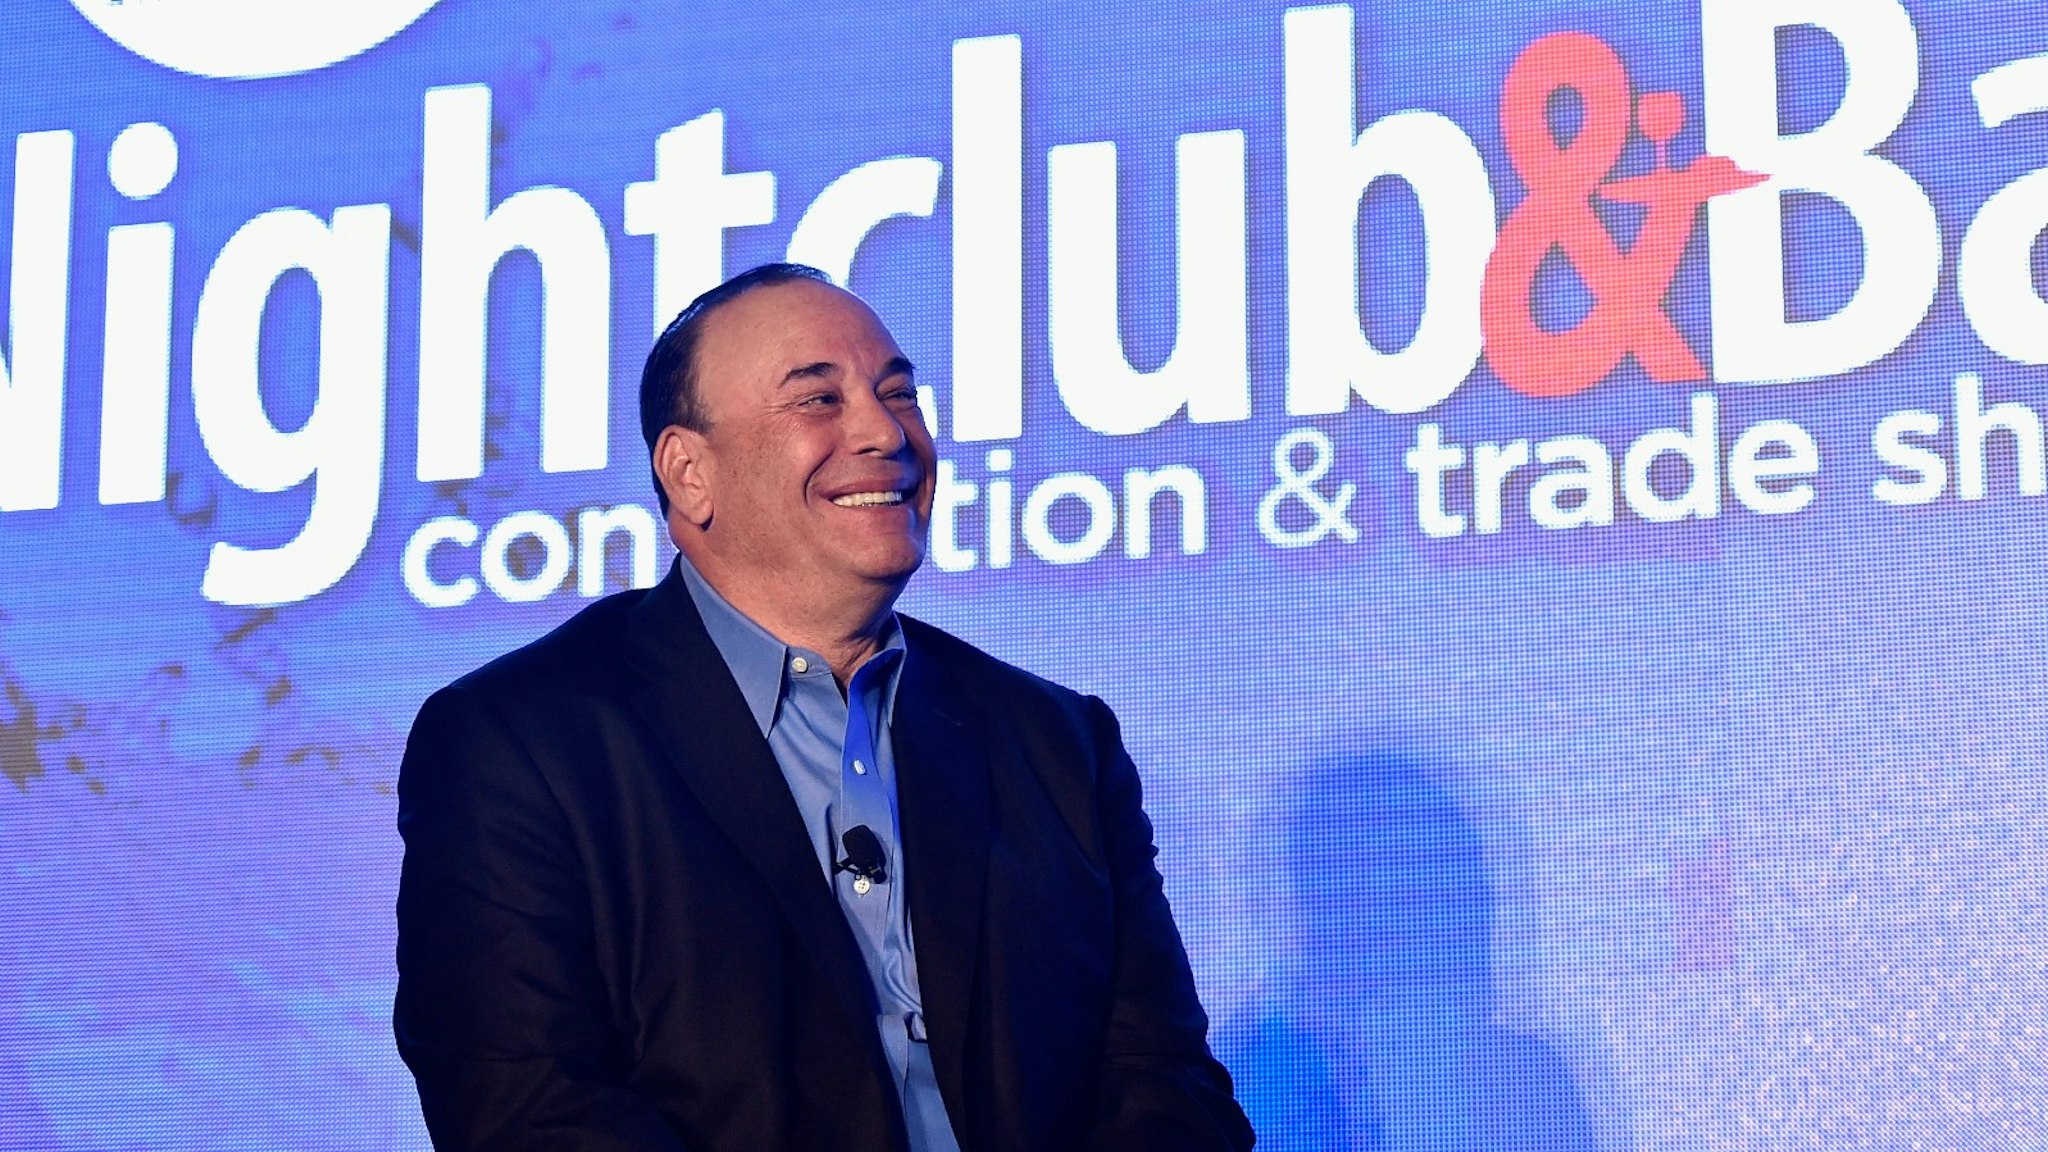 Nightclub & Bar Media Group President, host and Co-Executive Producer of the Spike television show 'Bar Rescue' Jon Taffer speaks onstage during the 30th annual Nightclub & Bar Convention and Trade Show at the Las Vegas Convention Center on March 30, 2015 in Las Vegas, Nevada.